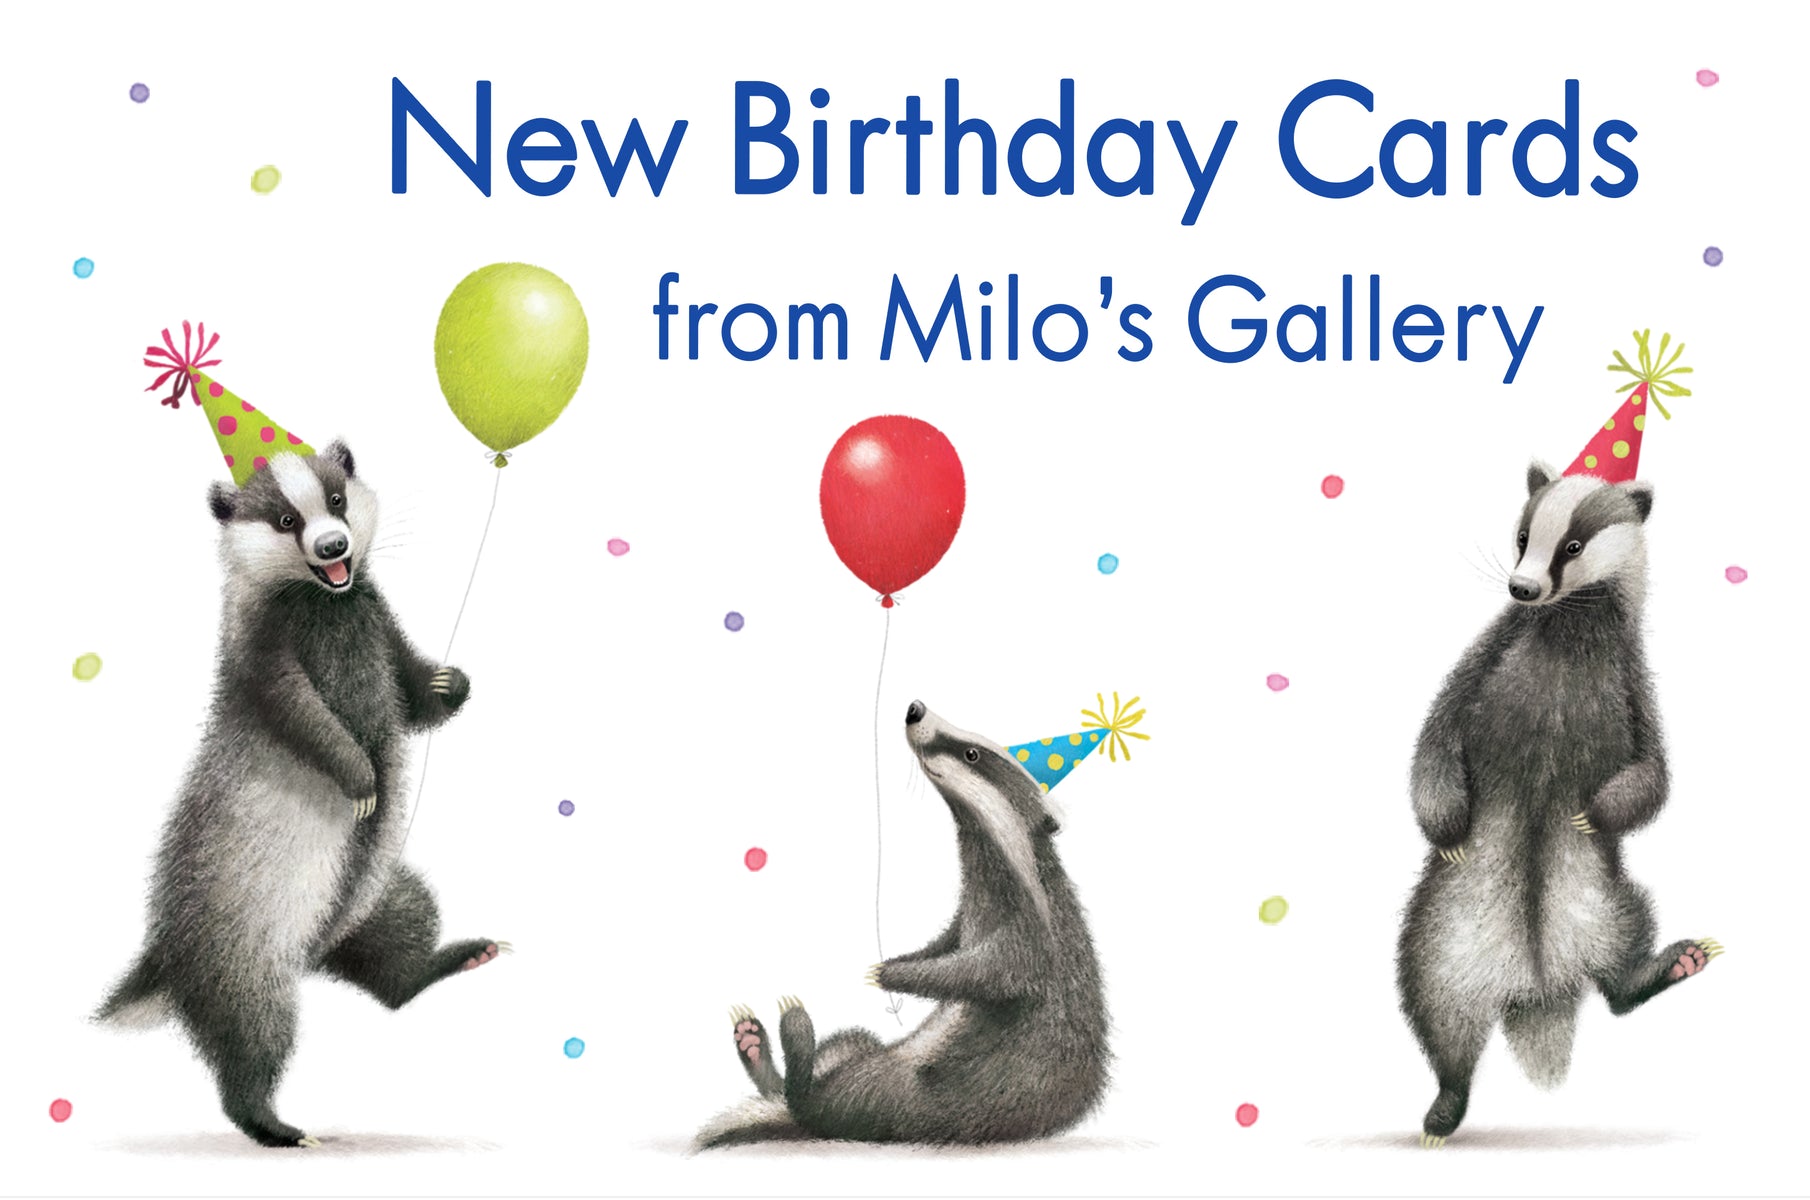 Hunts England - New Birthday Cards From Milo's Gallery